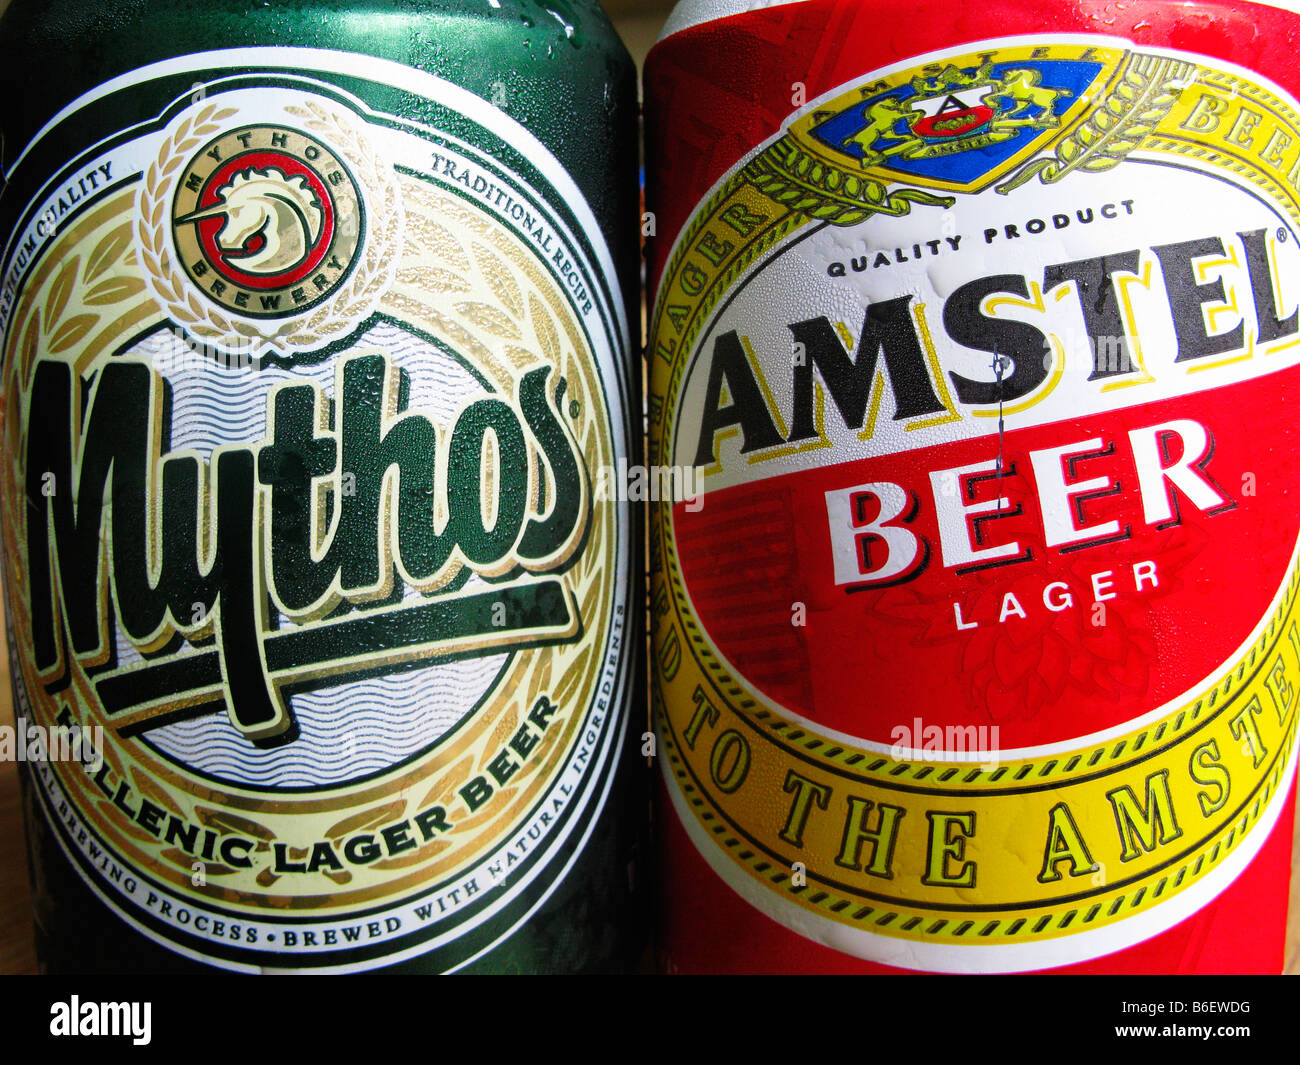 Greek Drinks Cans of Amstel and Mythos Beer Stock Photo